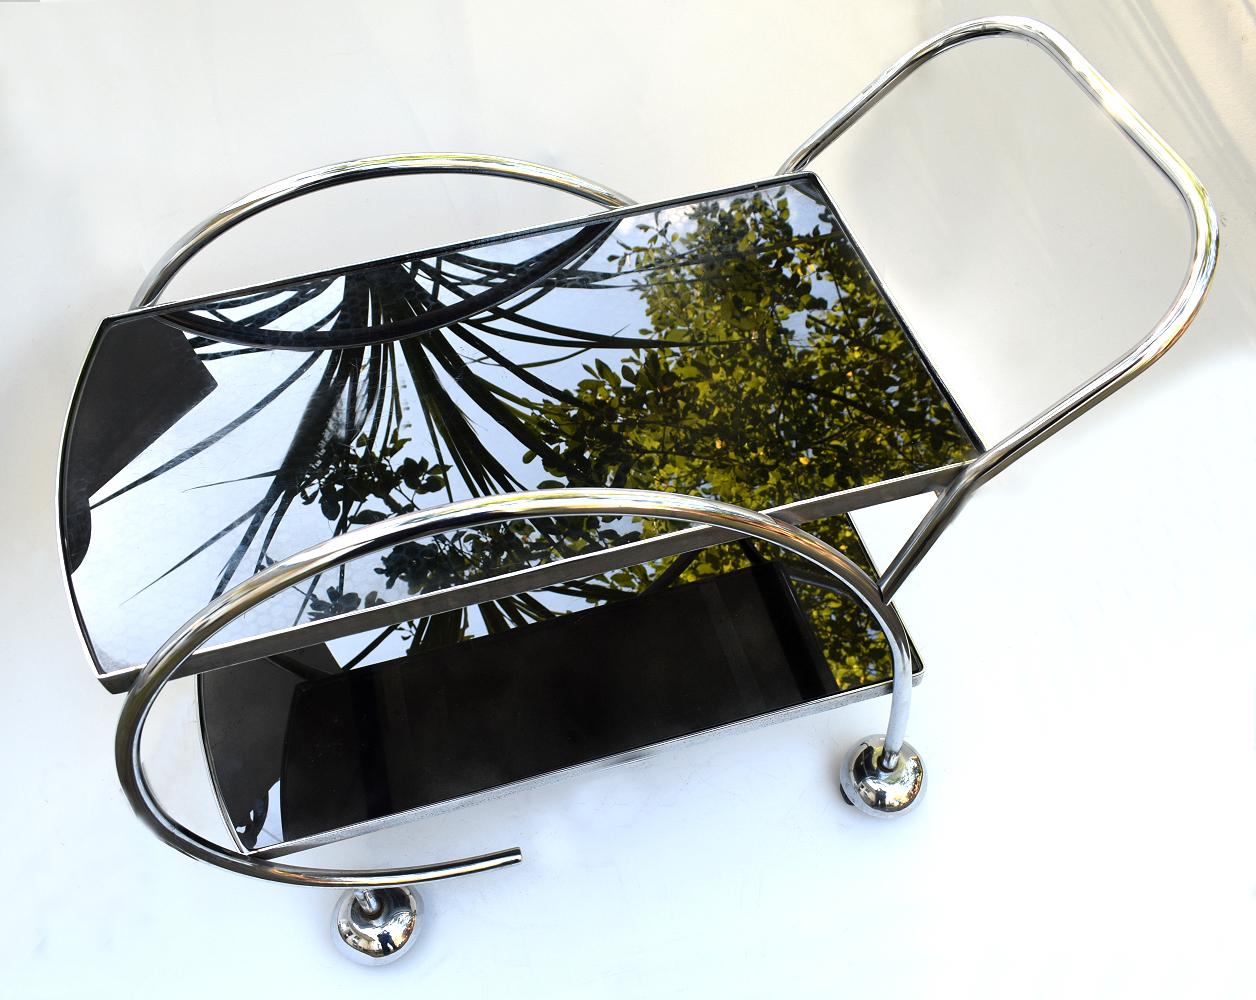 Stylish English 1930s Art Deco two-tier chrome and black glass drinks hostess trolley bar cart. This design is a little more unusual in shape than you normally find and is a lot more substantial in weight, quality and is very sturdy. If glam is your